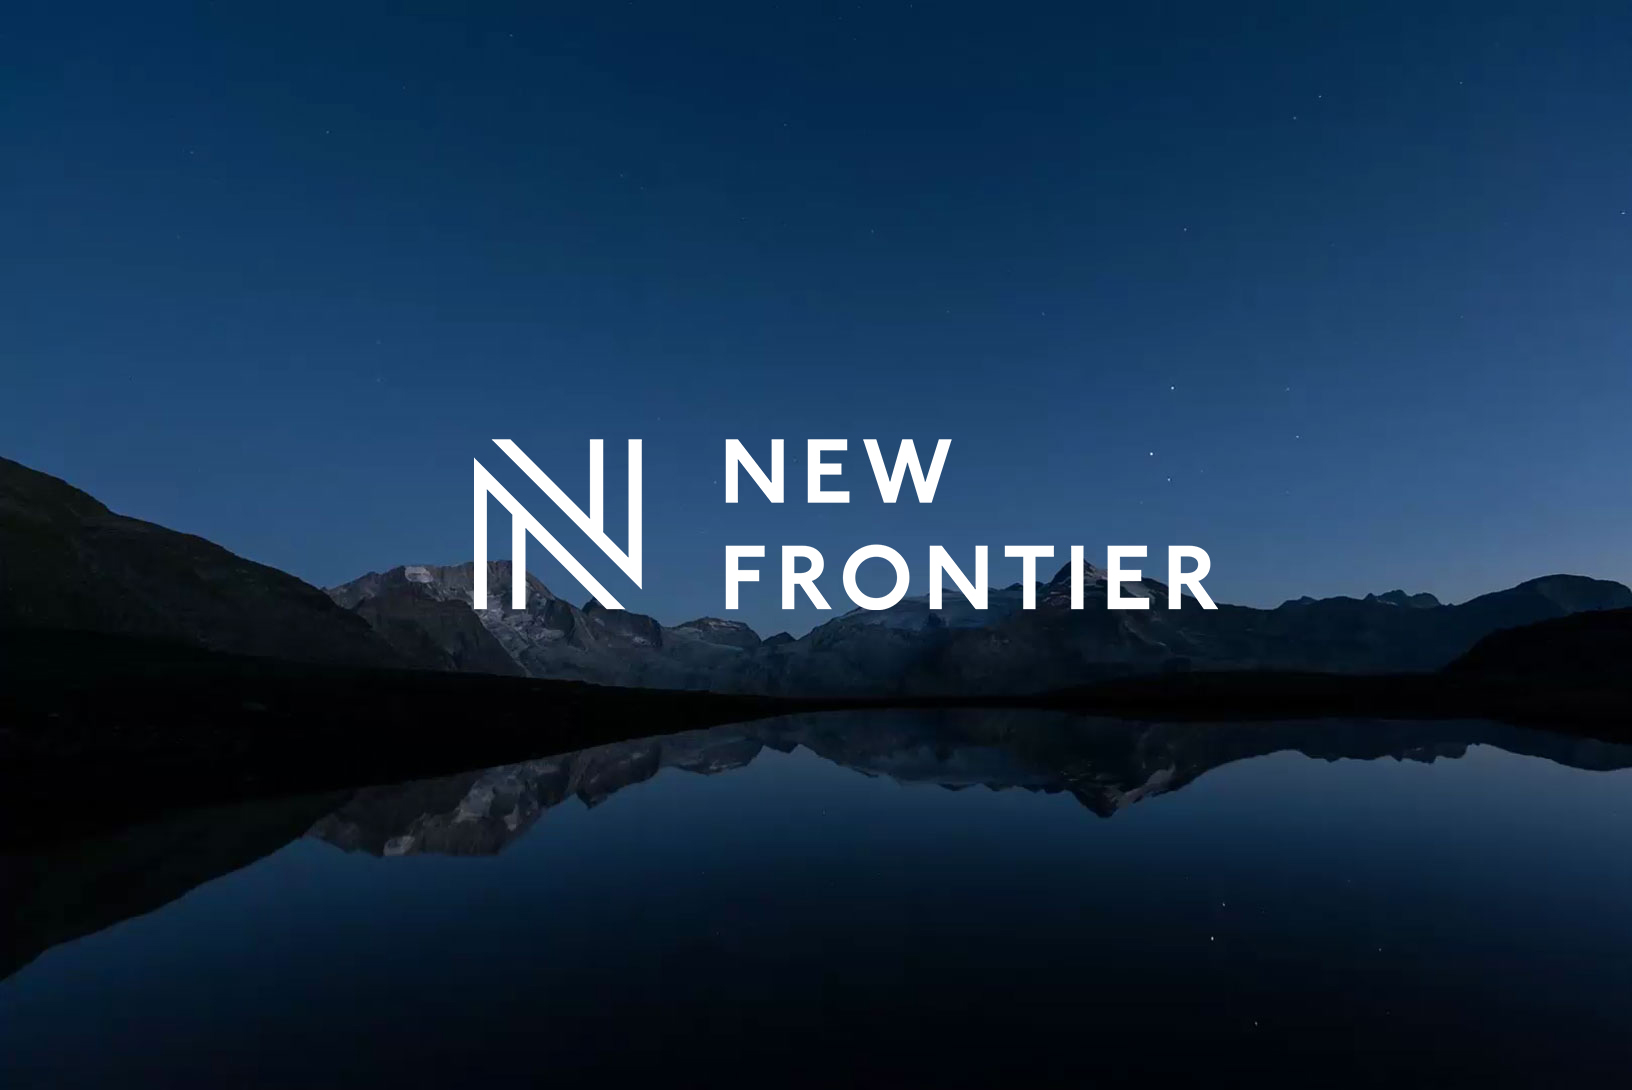 New Frontier Group